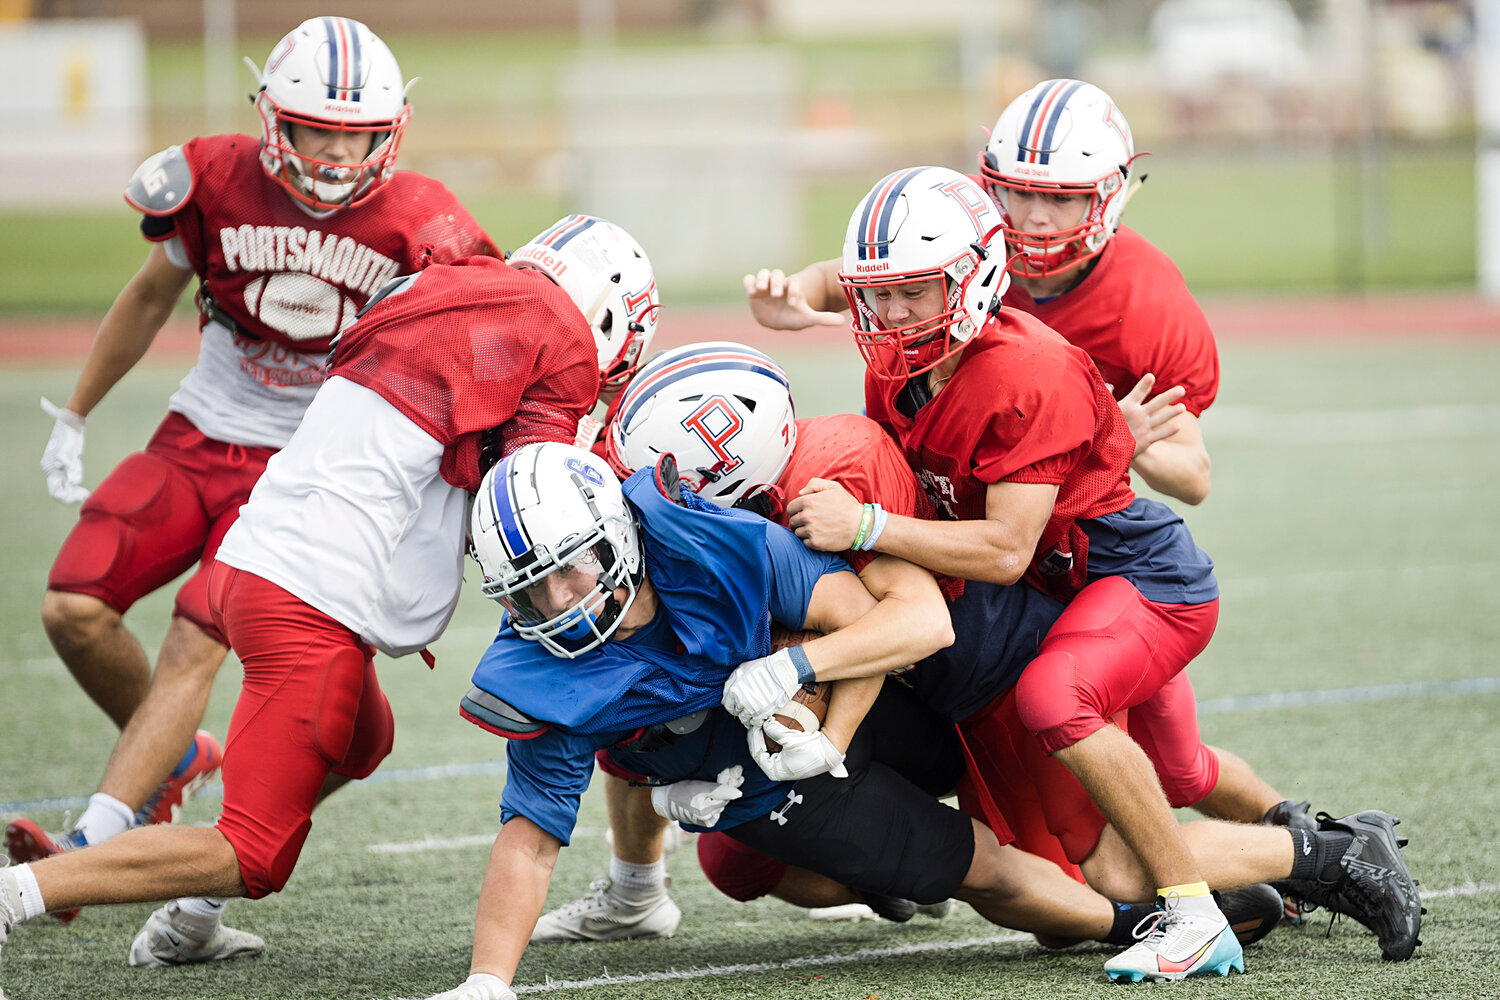 The Patriots defense stops a Middletown ball-carrier from advancing.